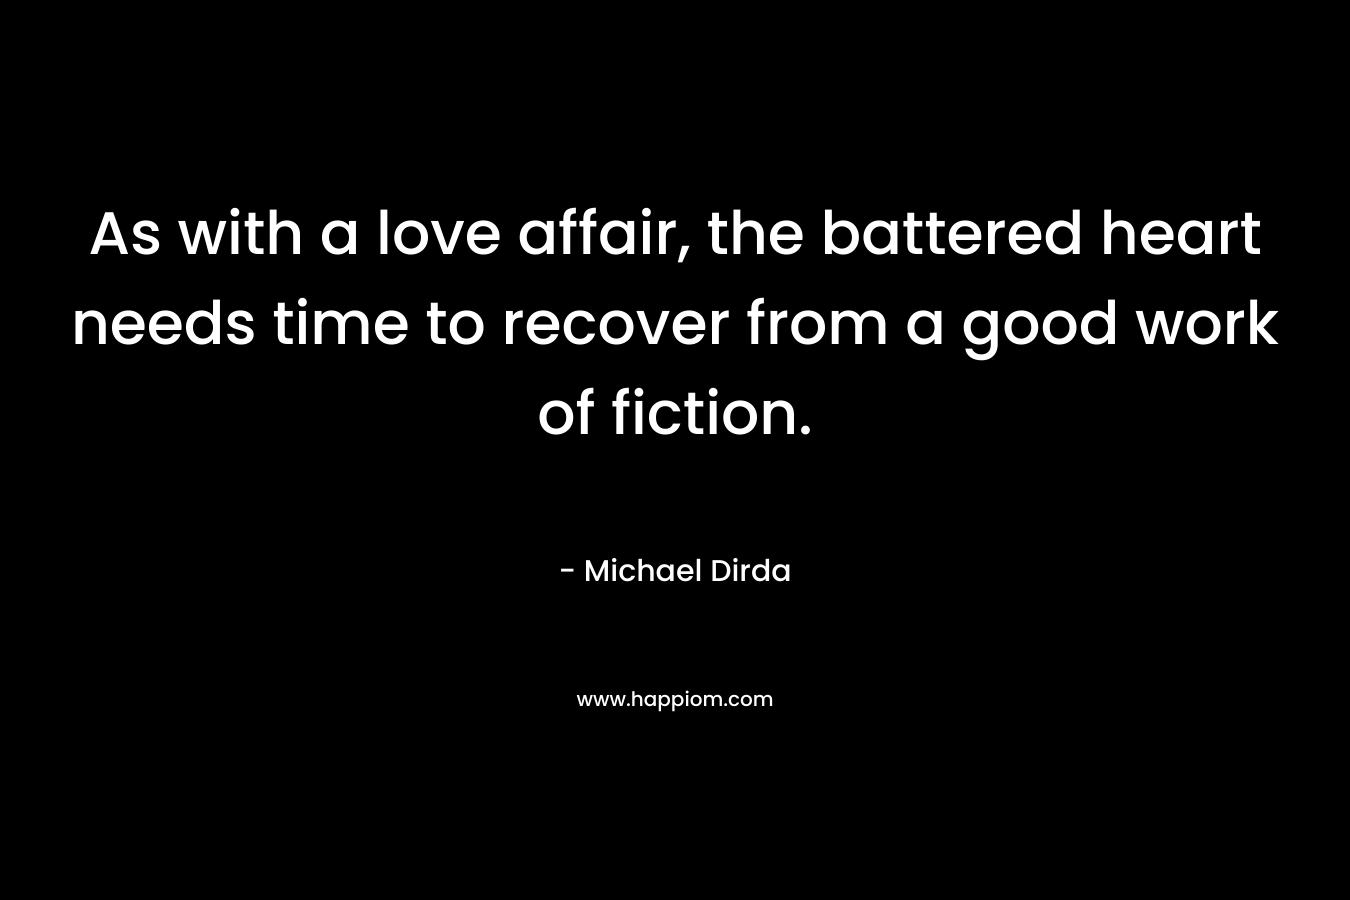 As with a love affair, the battered heart needs time to recover from a good work of fiction. – Michael Dirda